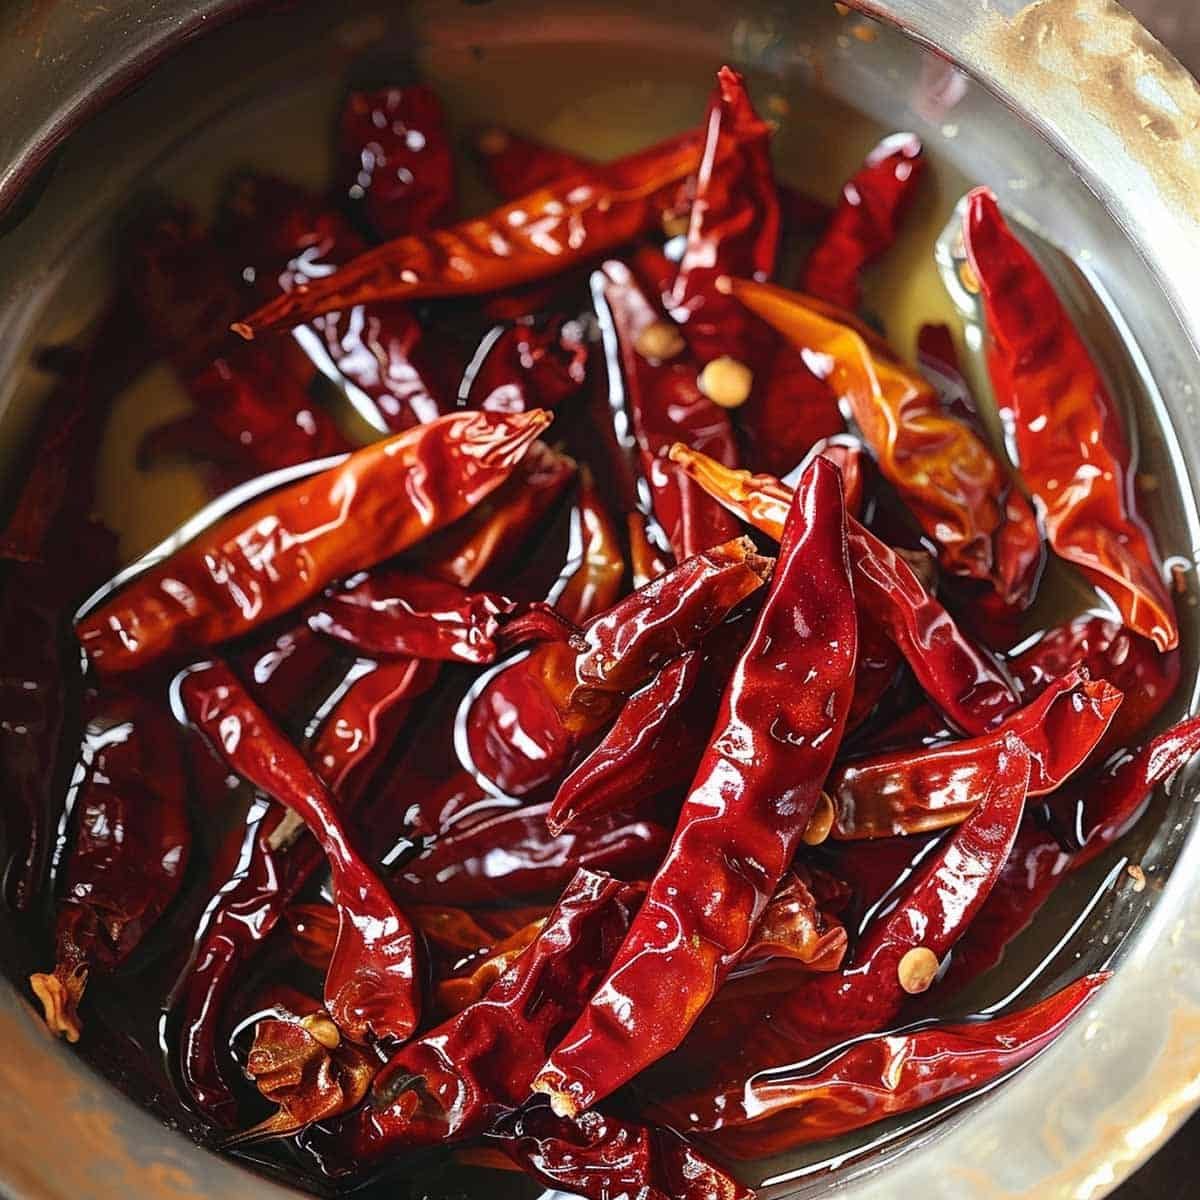 Soaking dried red chilies in warm water